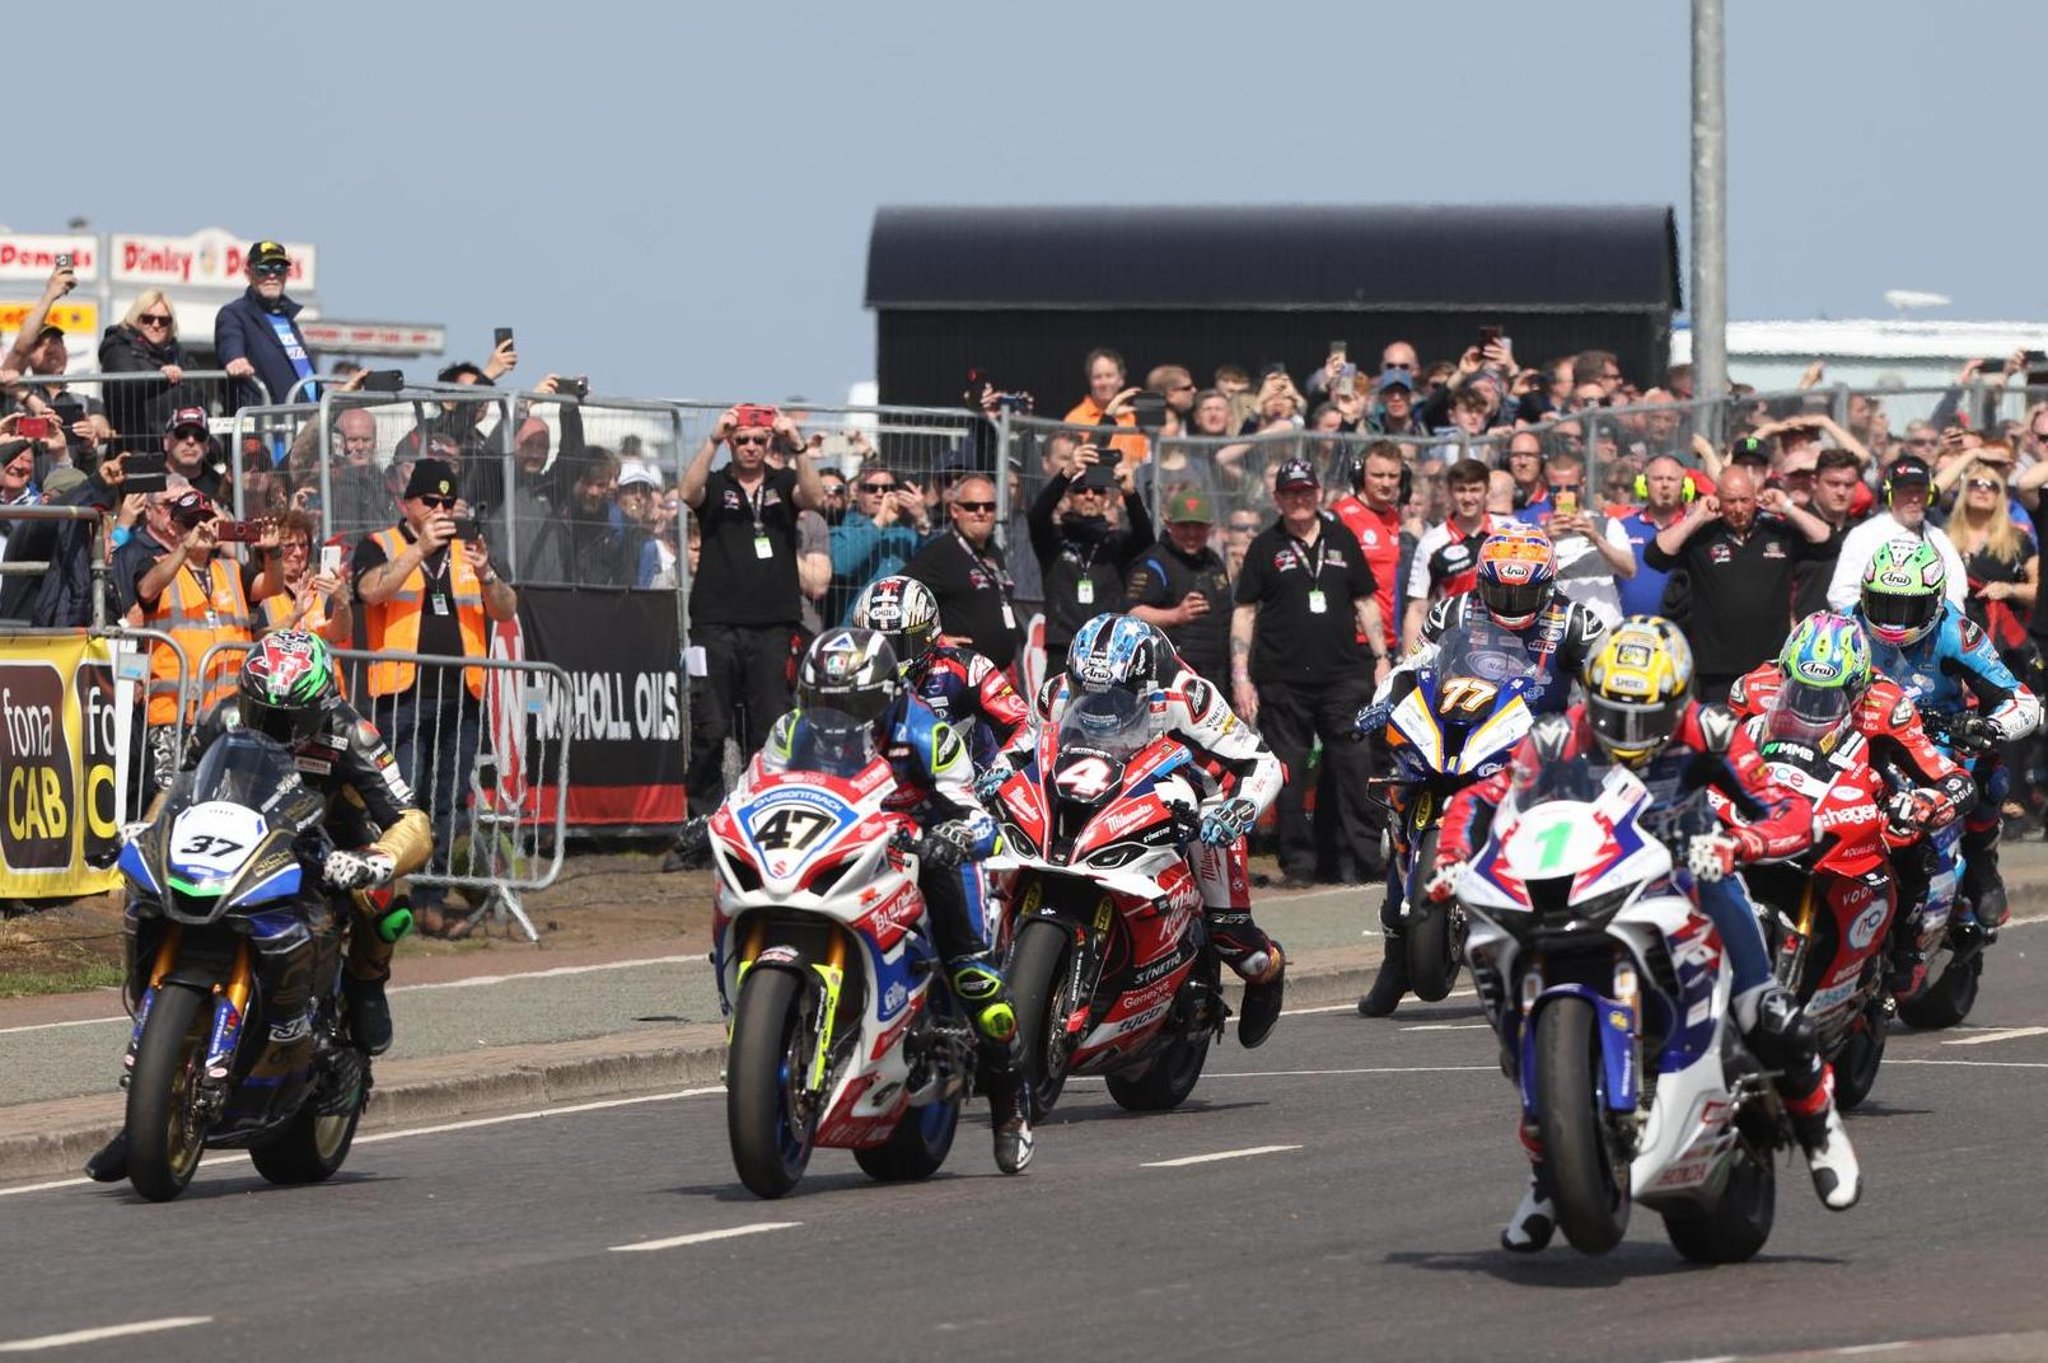 Tourism NI responds to criticism over support for North West 200